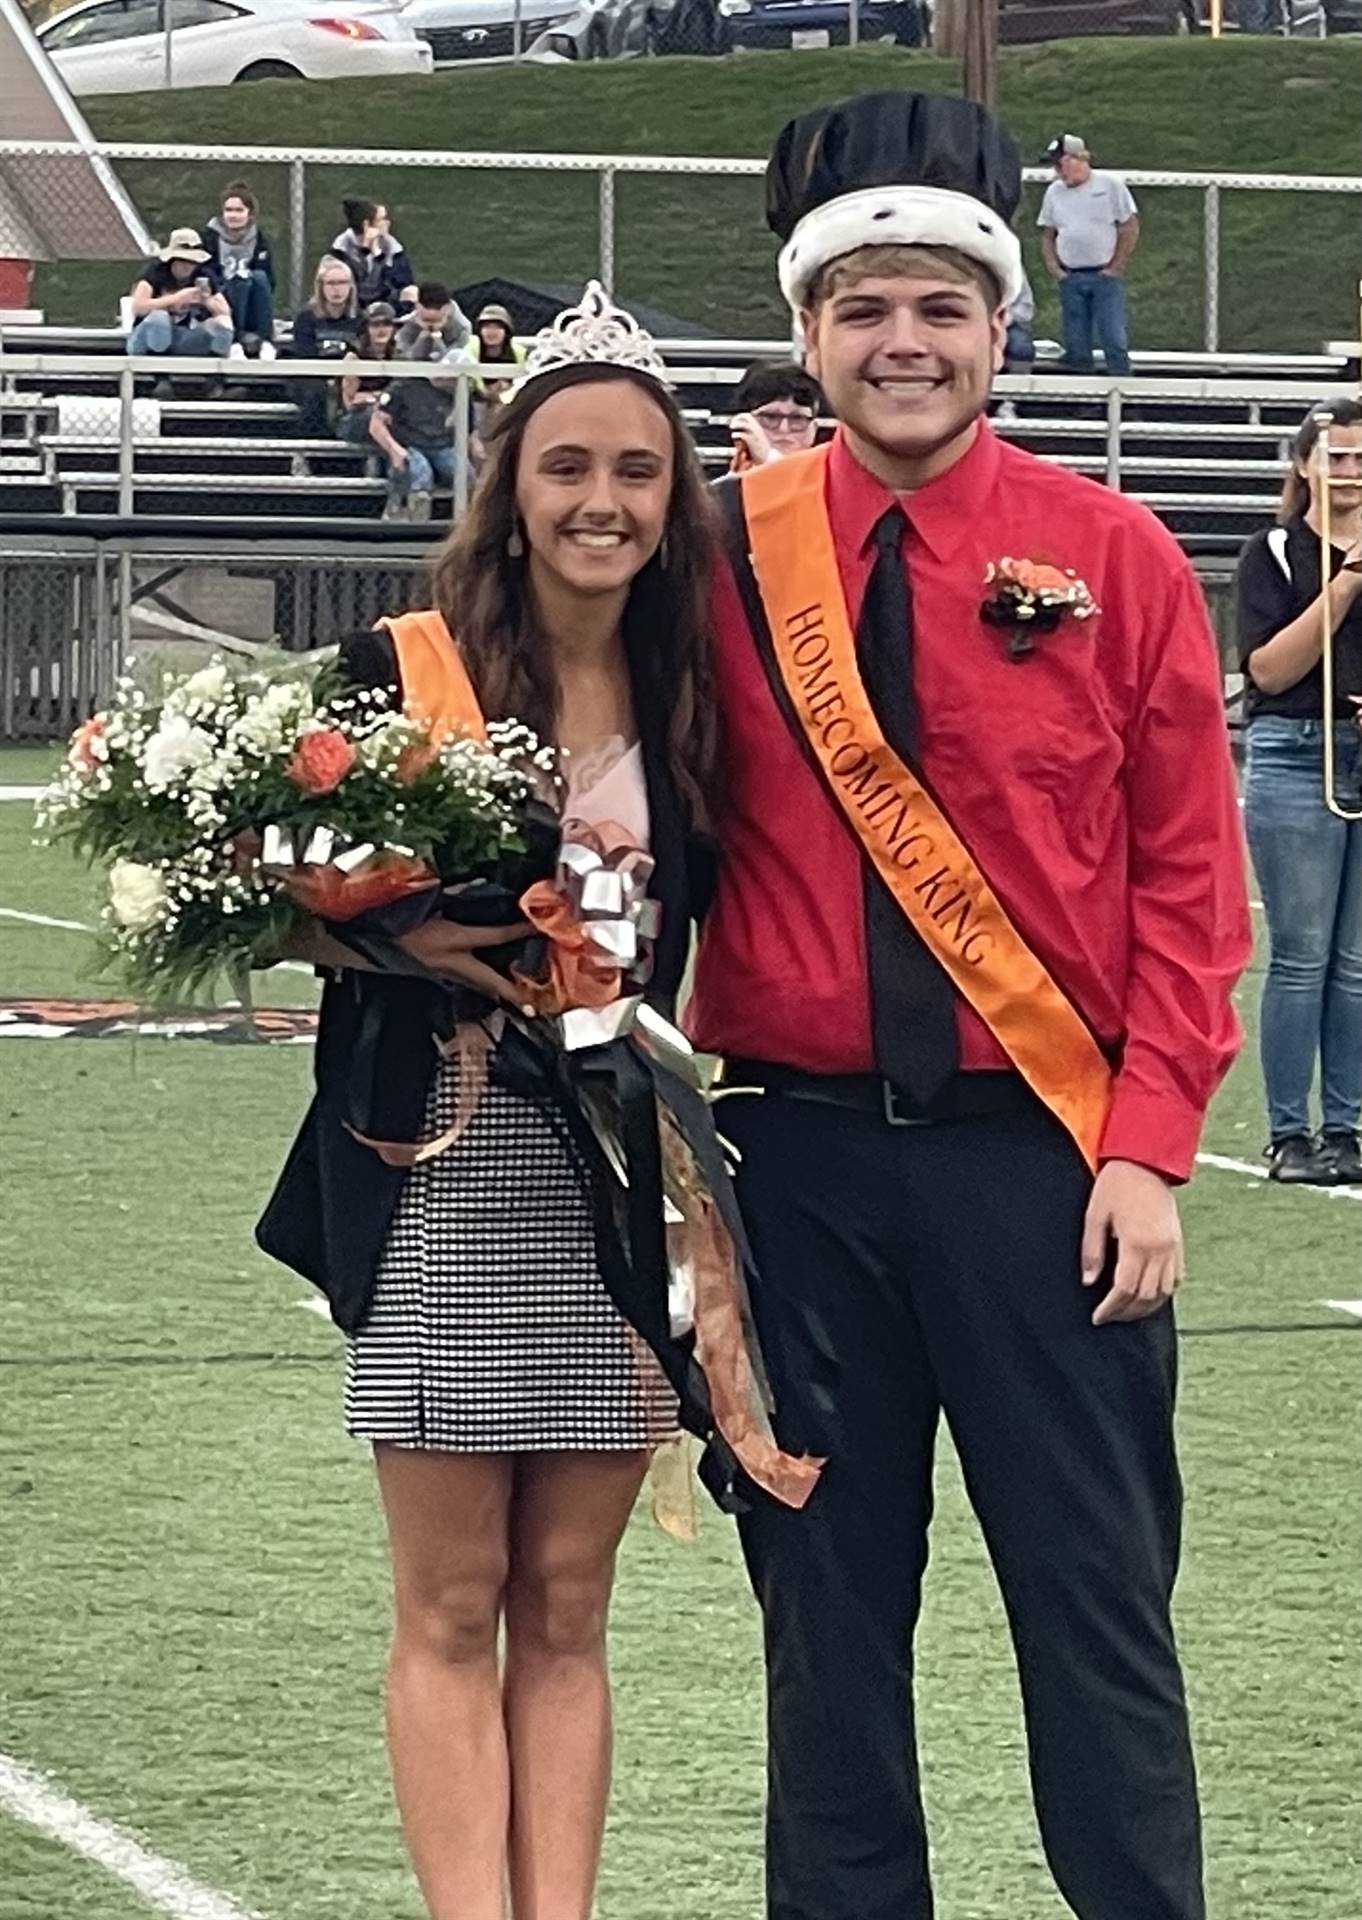 Homecoming King and Queen 2021